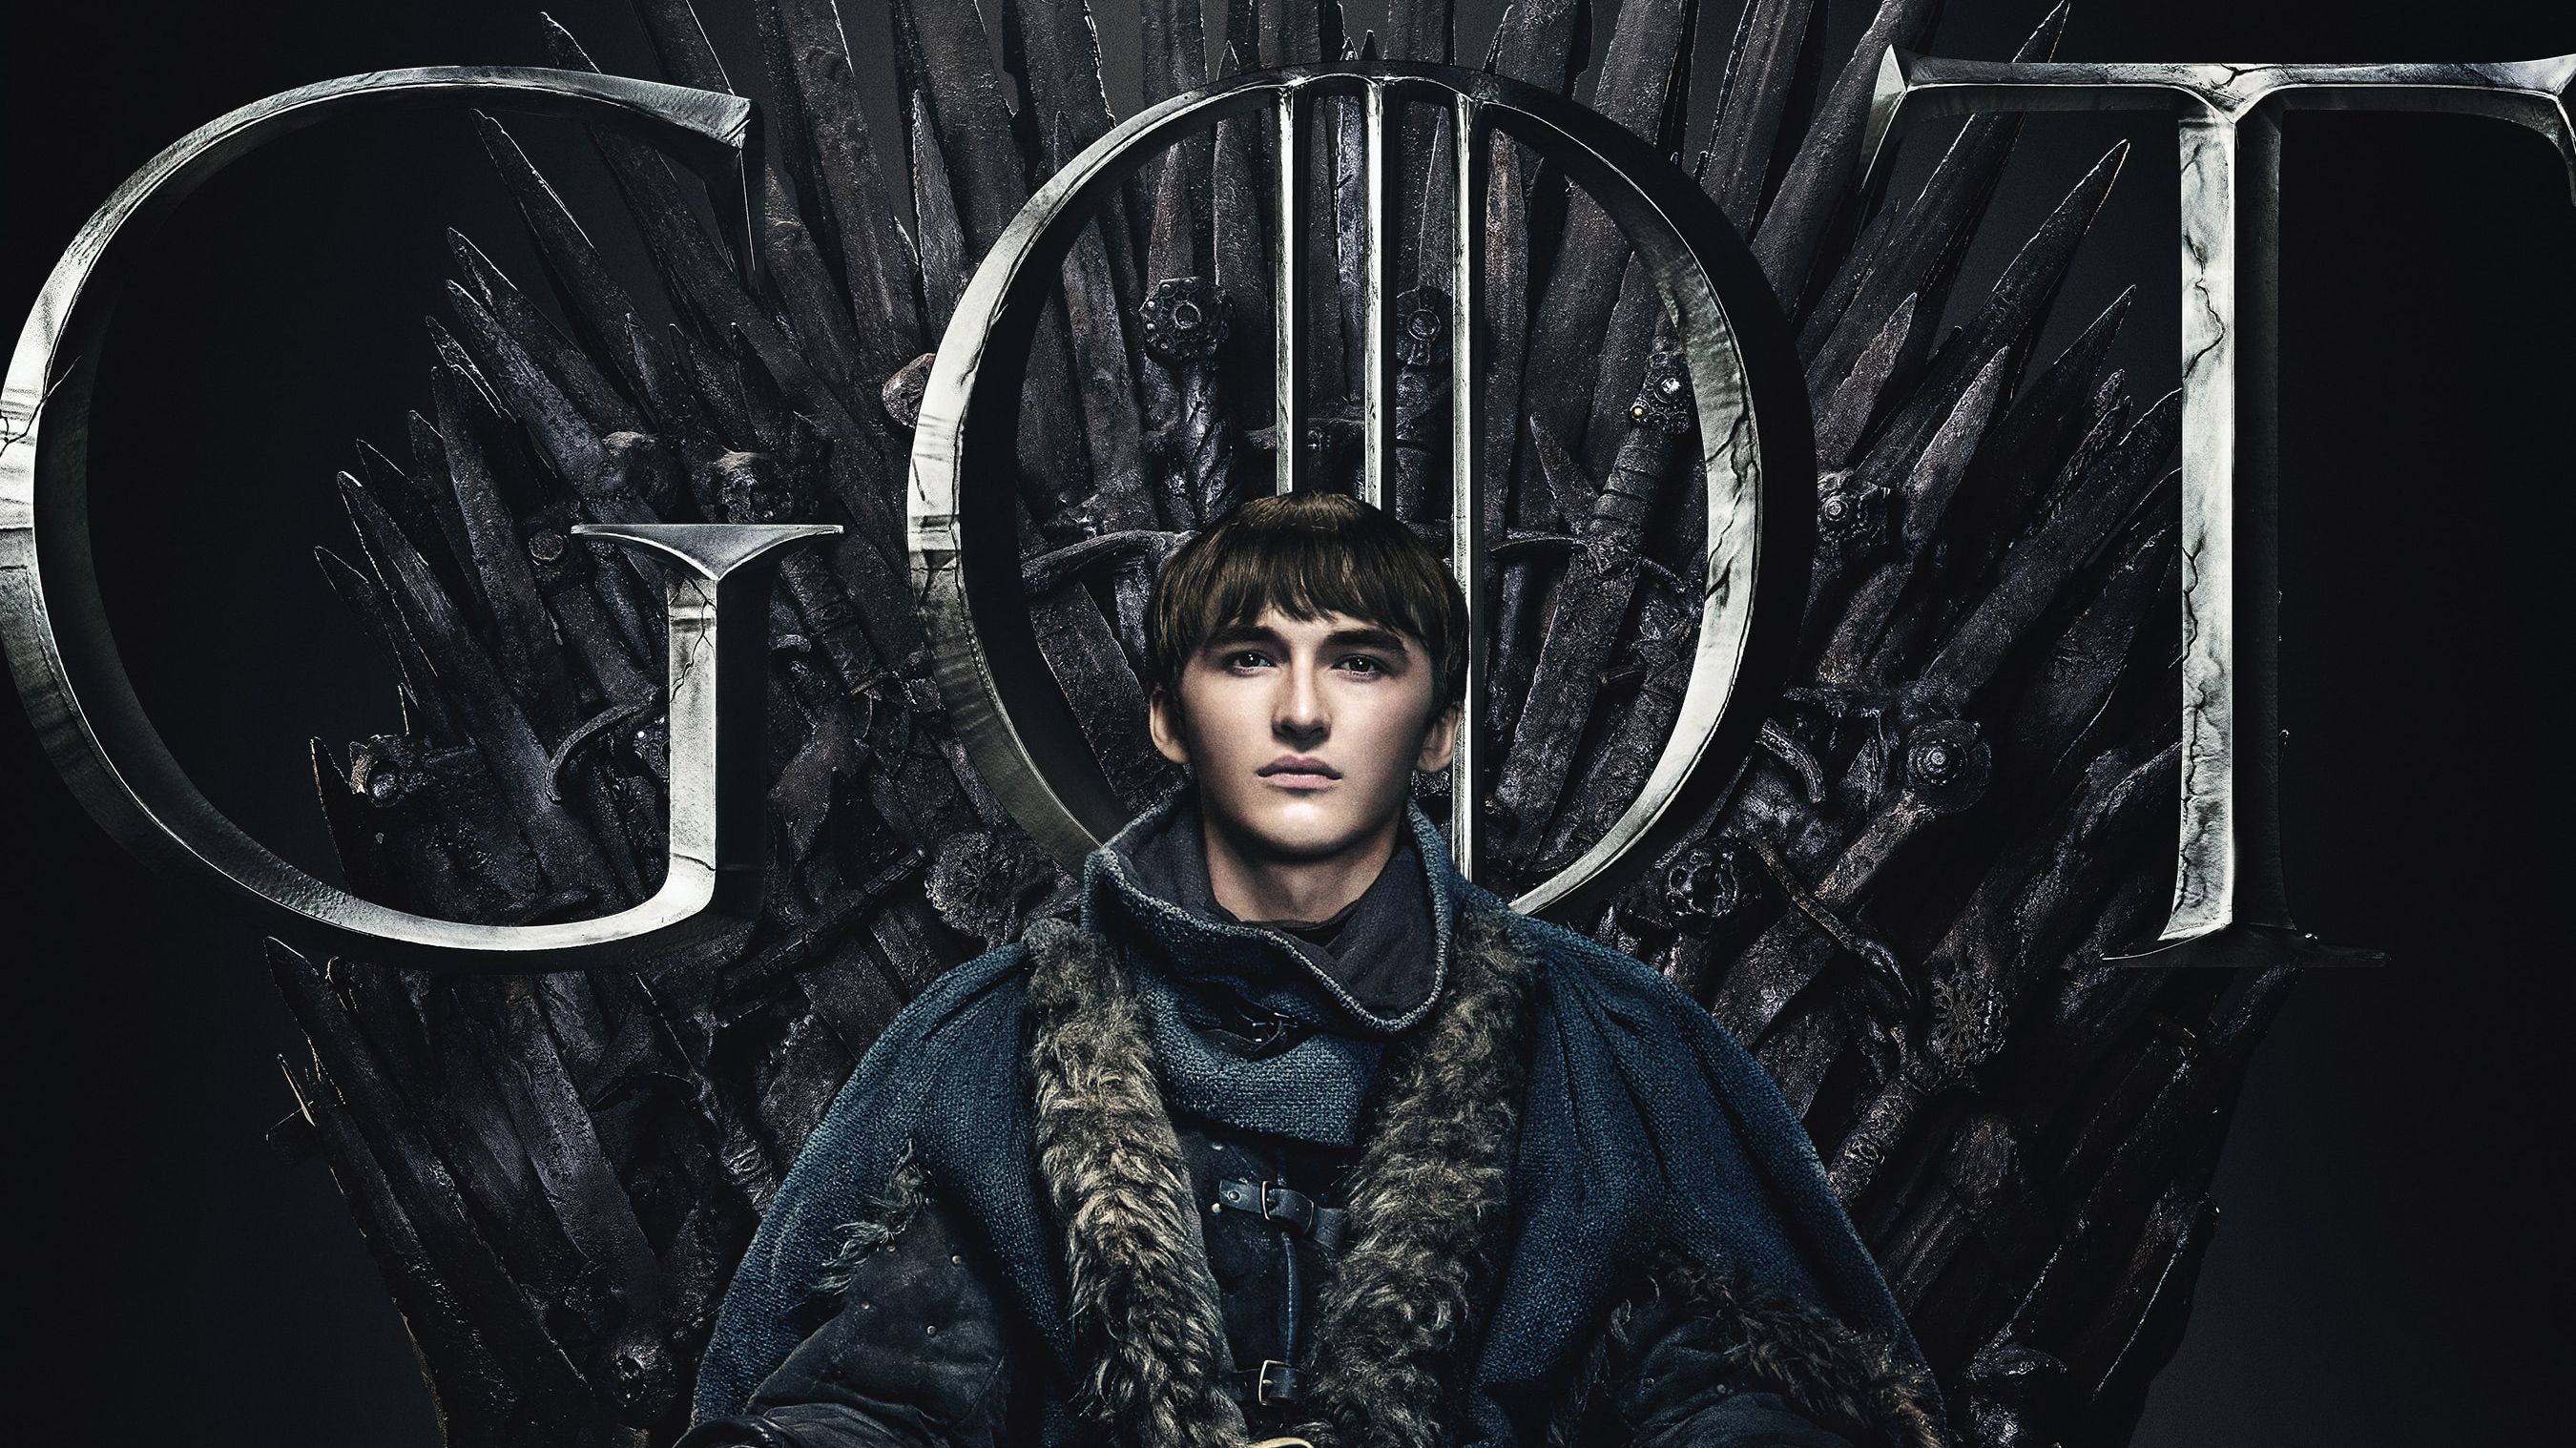 Bran Stark Game Of Thrones Season 8 Poster, HD Tv Shows, 4k Wallpaper, Image, Background, Photo and Picture